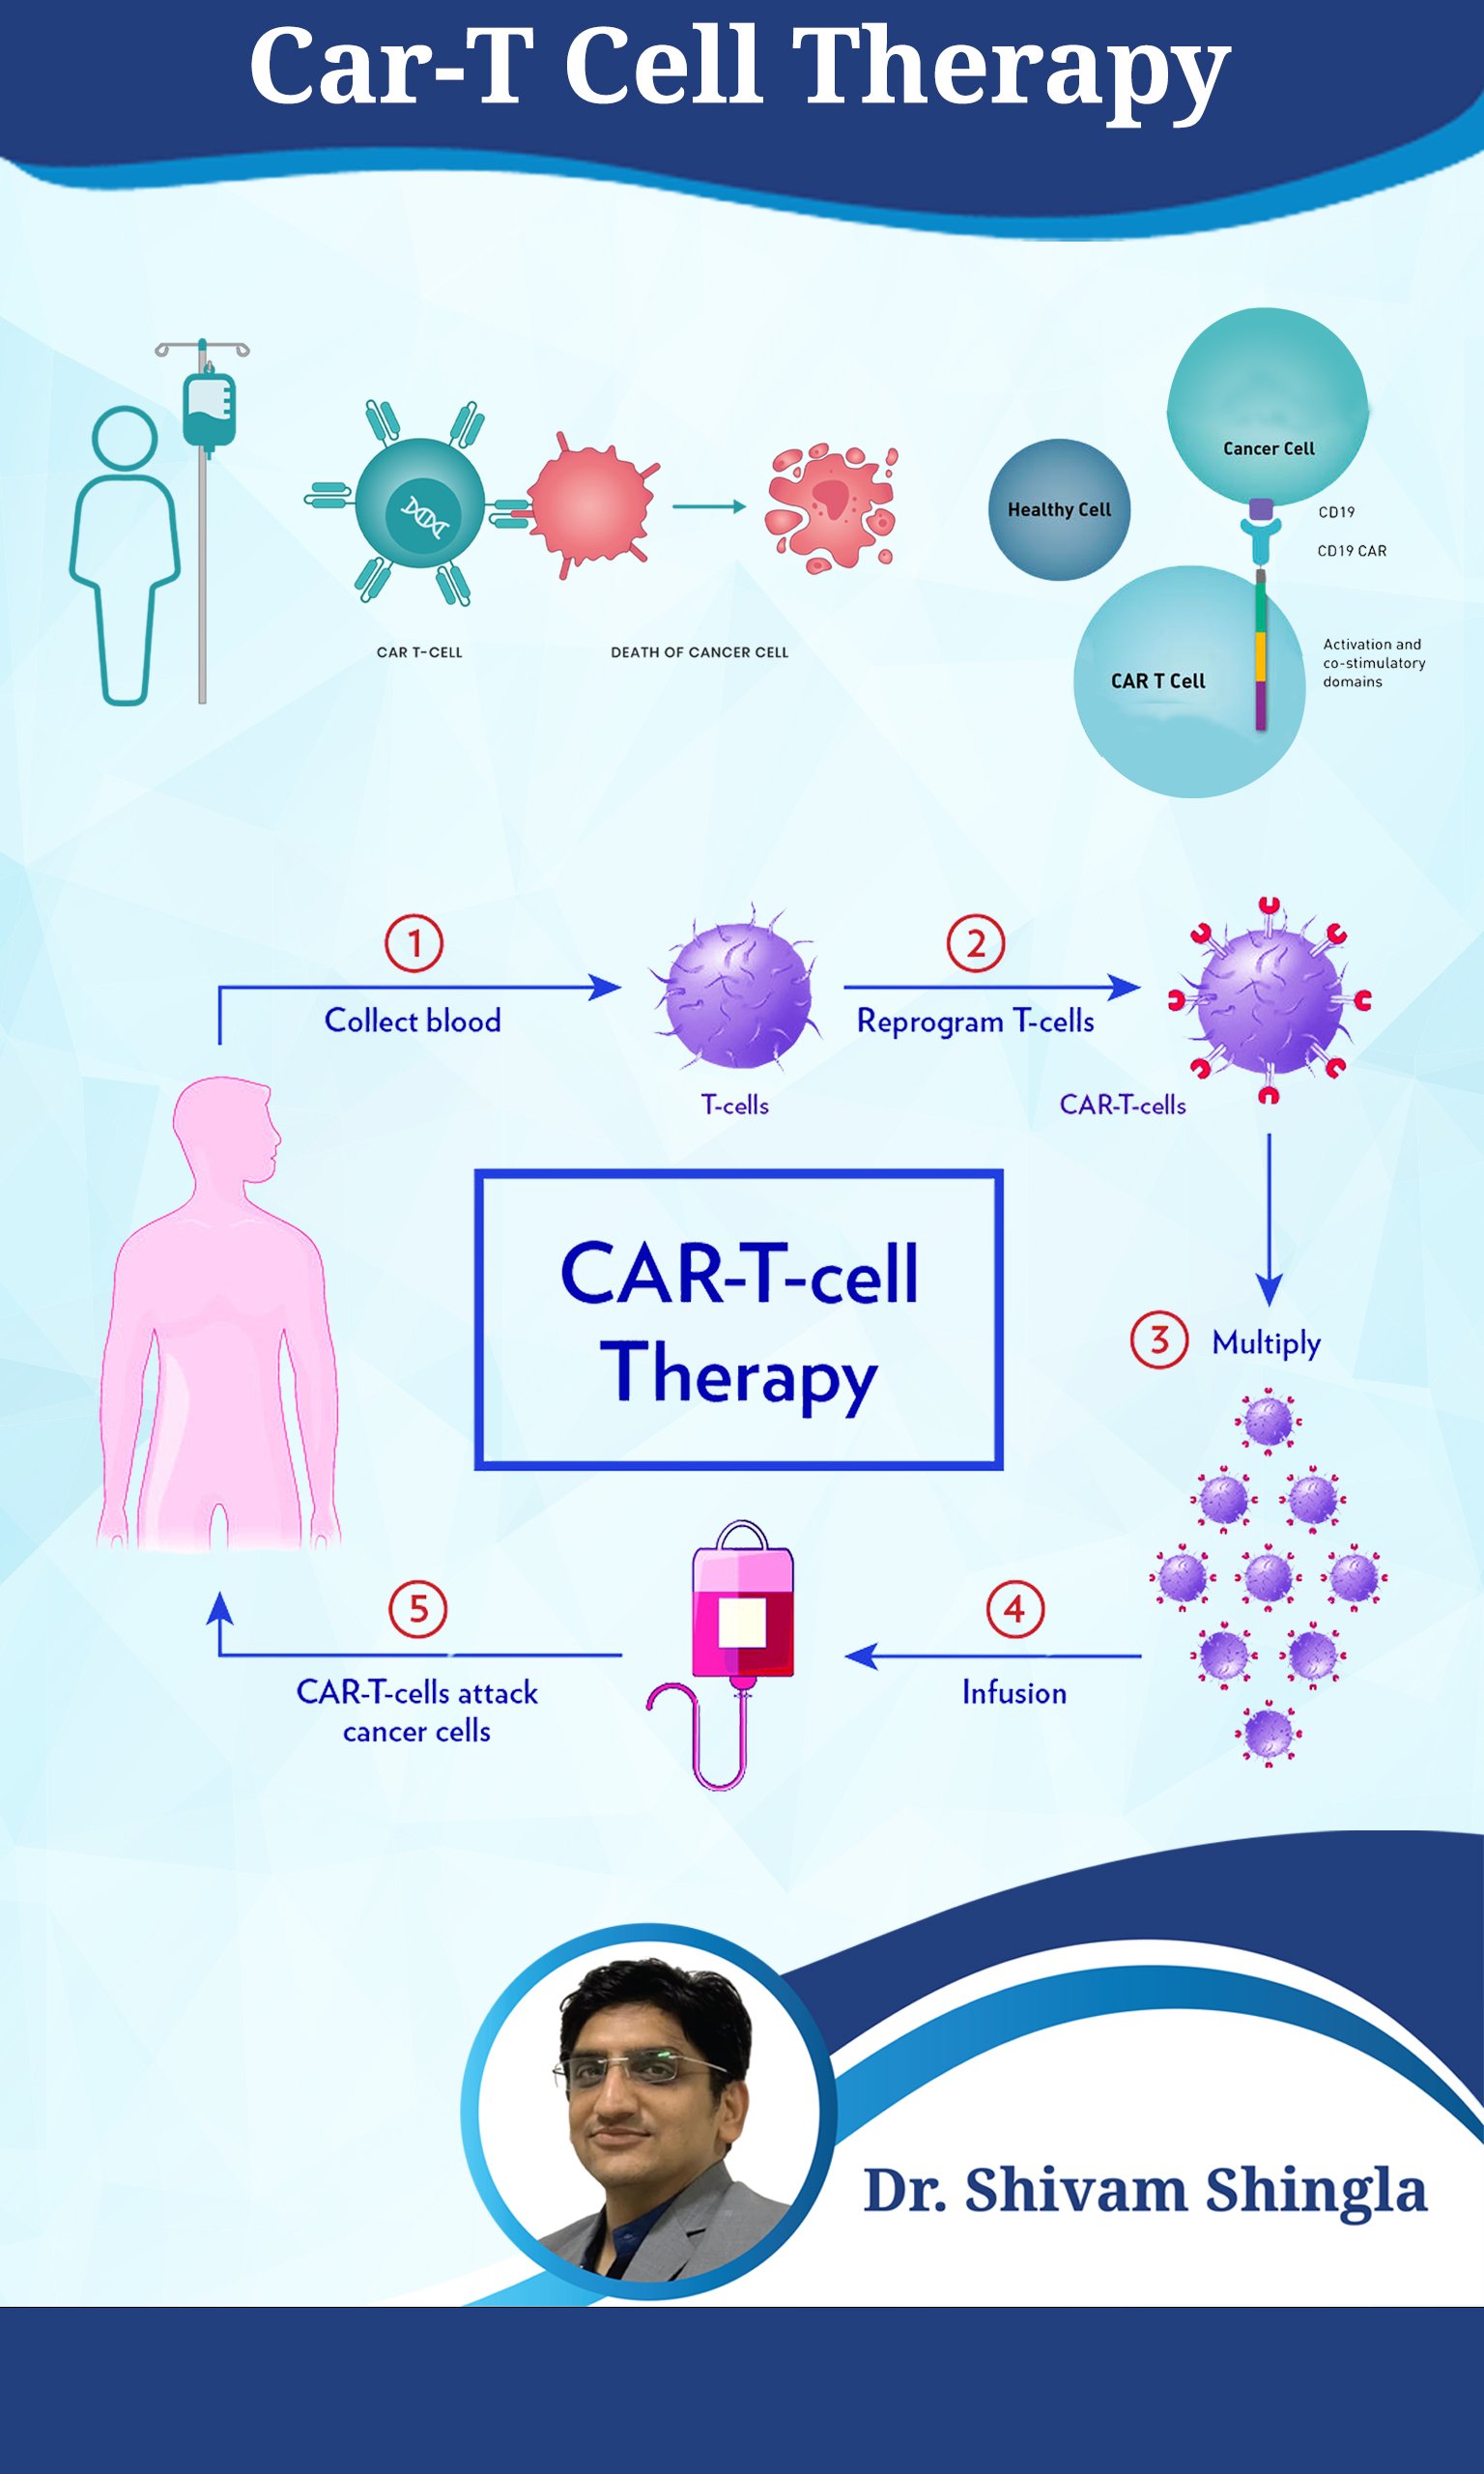 Car-t Cell Therapy (3)